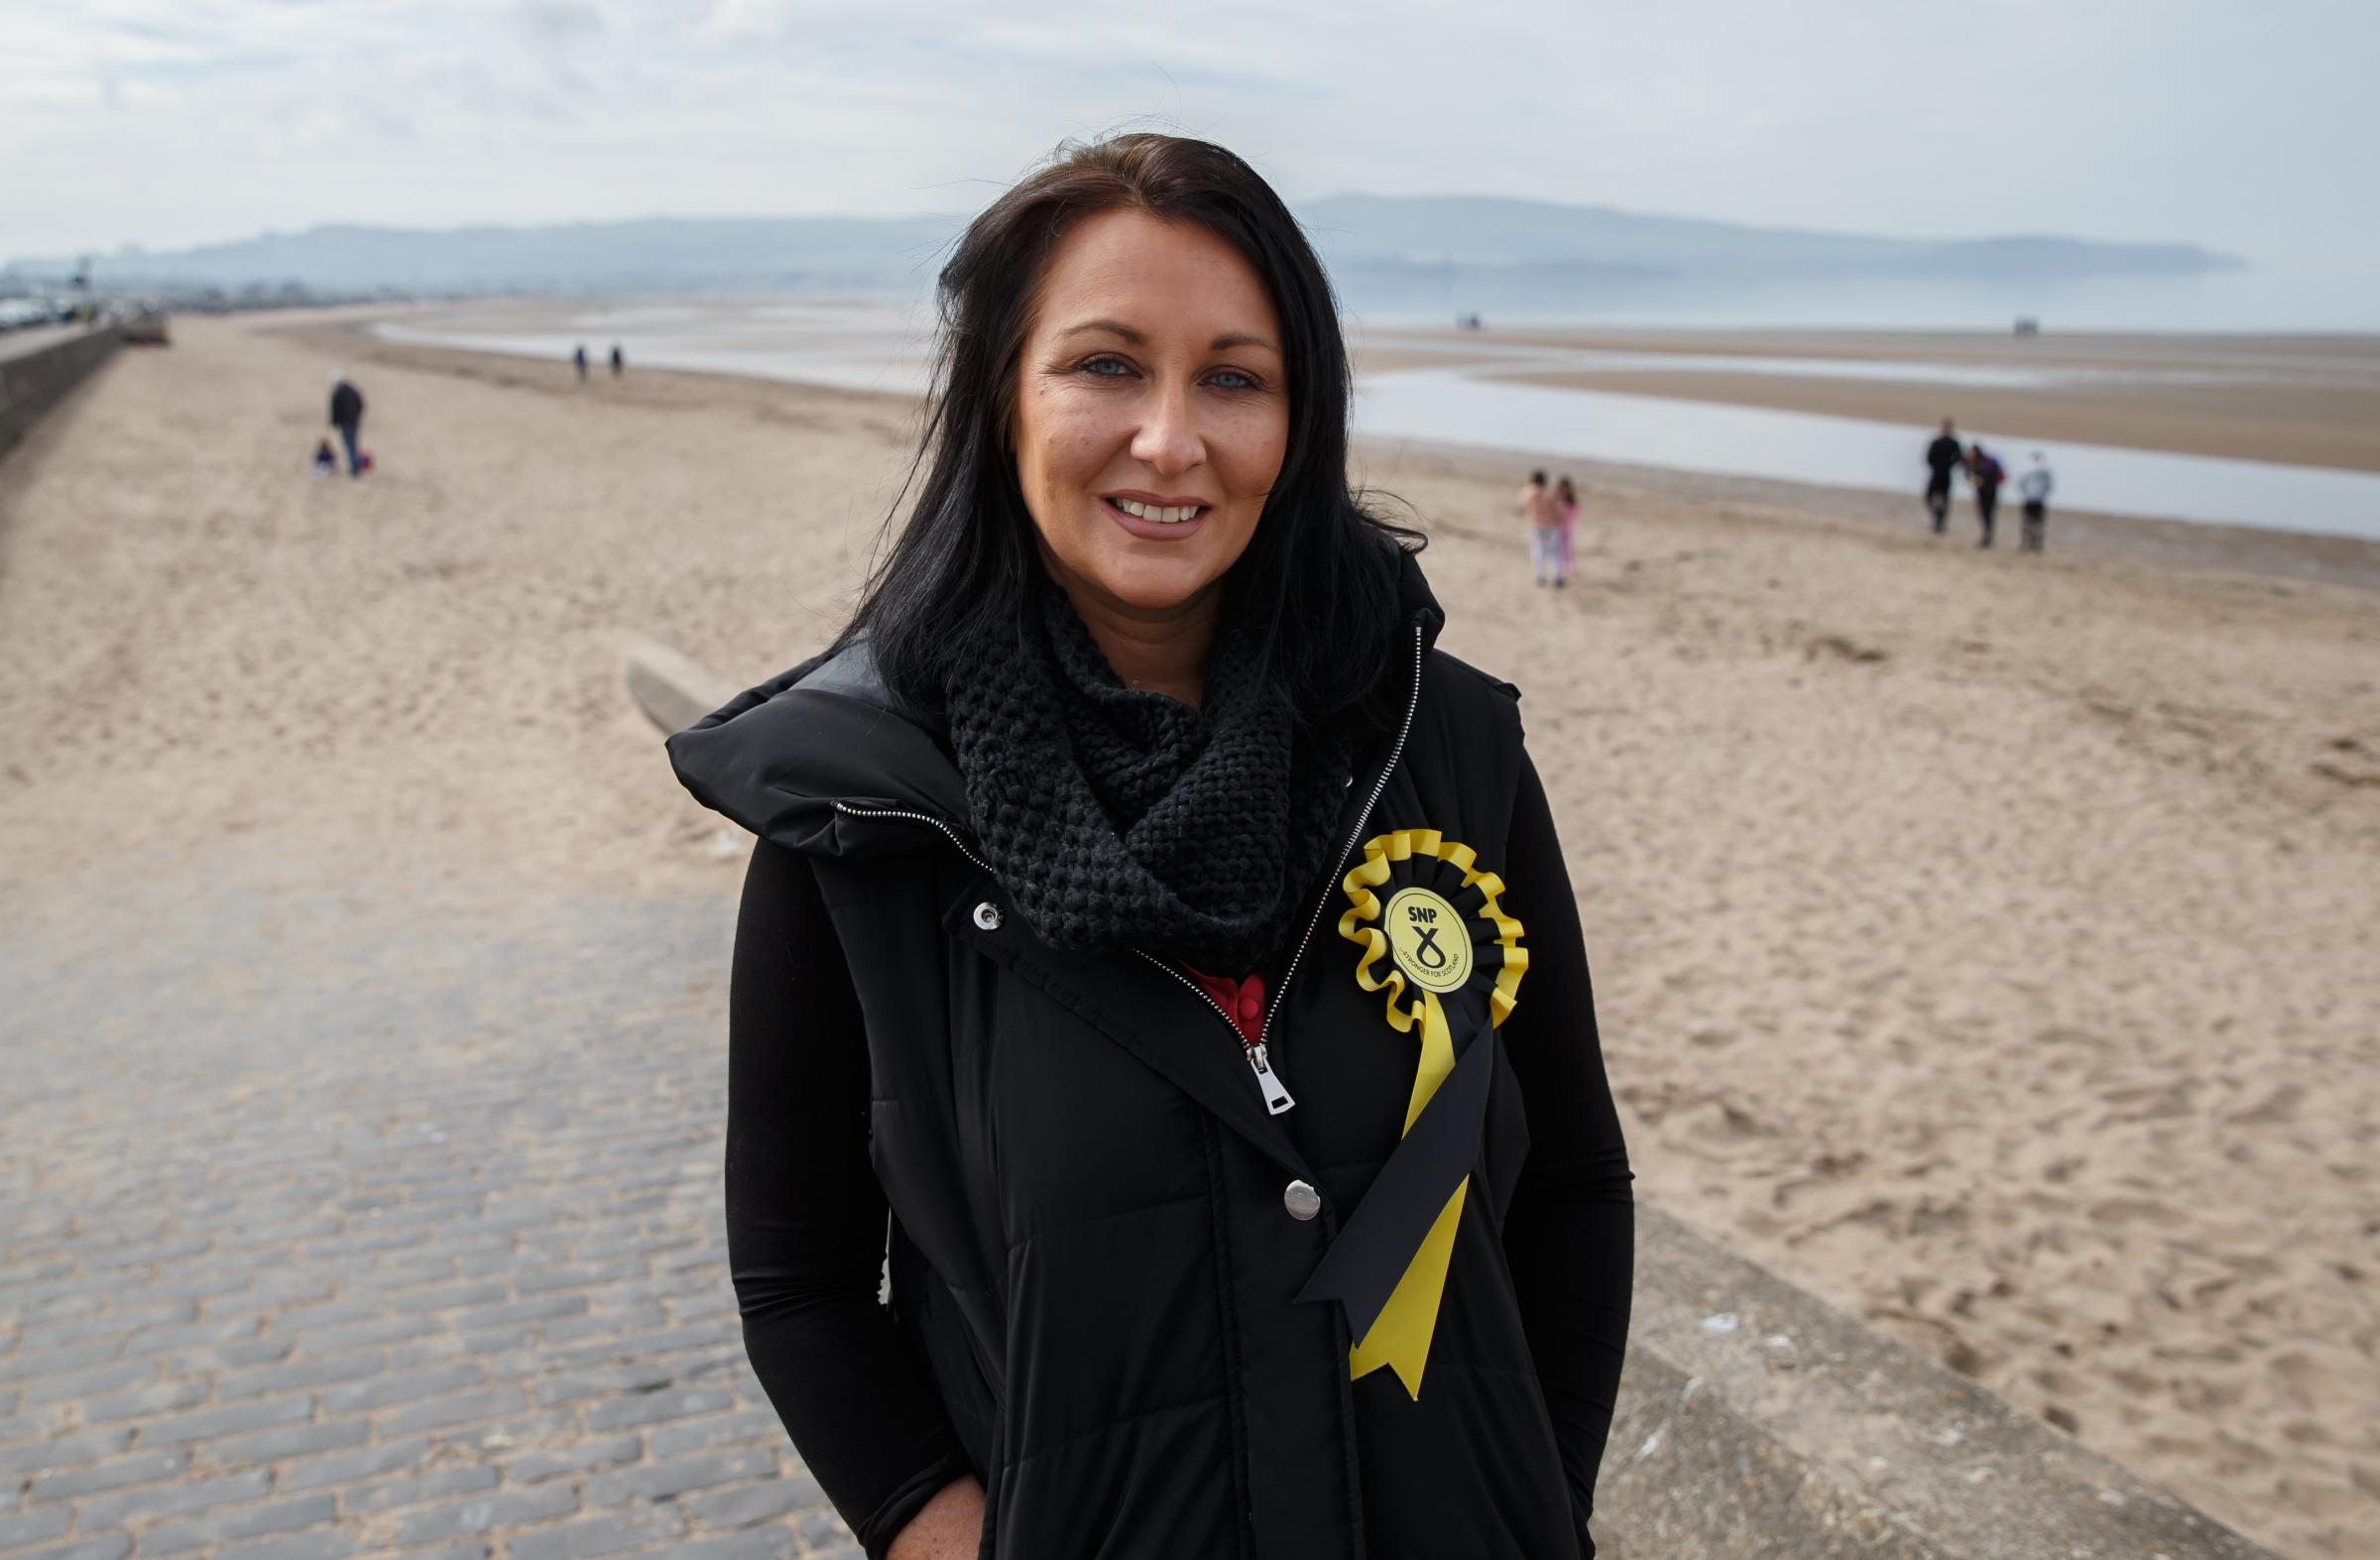 Key battleground: SNP going all out in Ayr to finally topple Tory